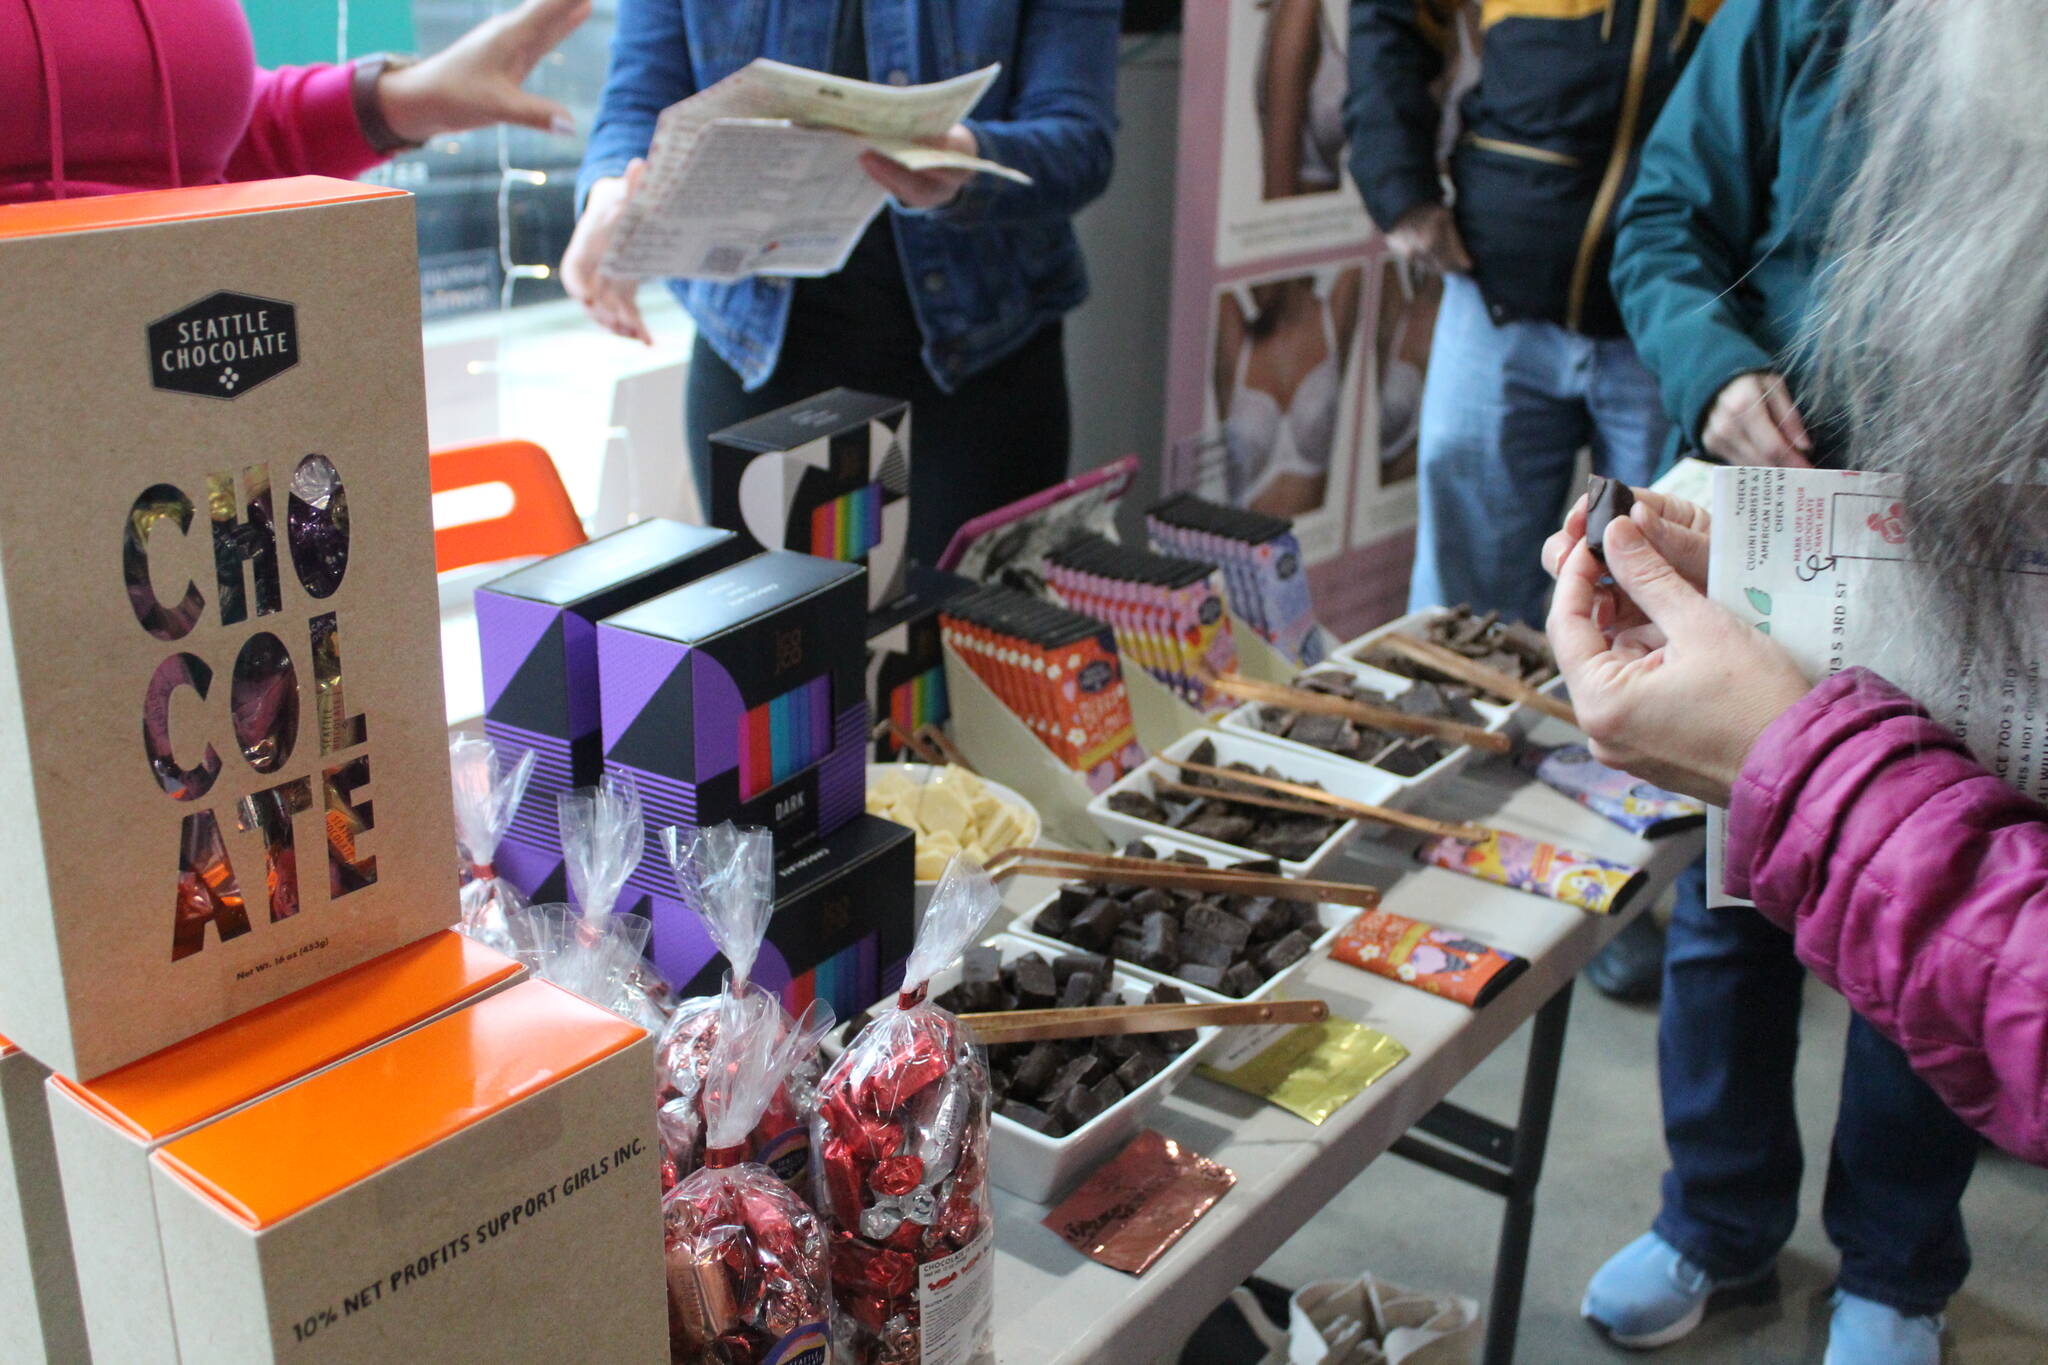 People line up for Seattle’s Chocolate at The Pencil Test. Photo by Bailey Jo Josie/Sound Publishing.